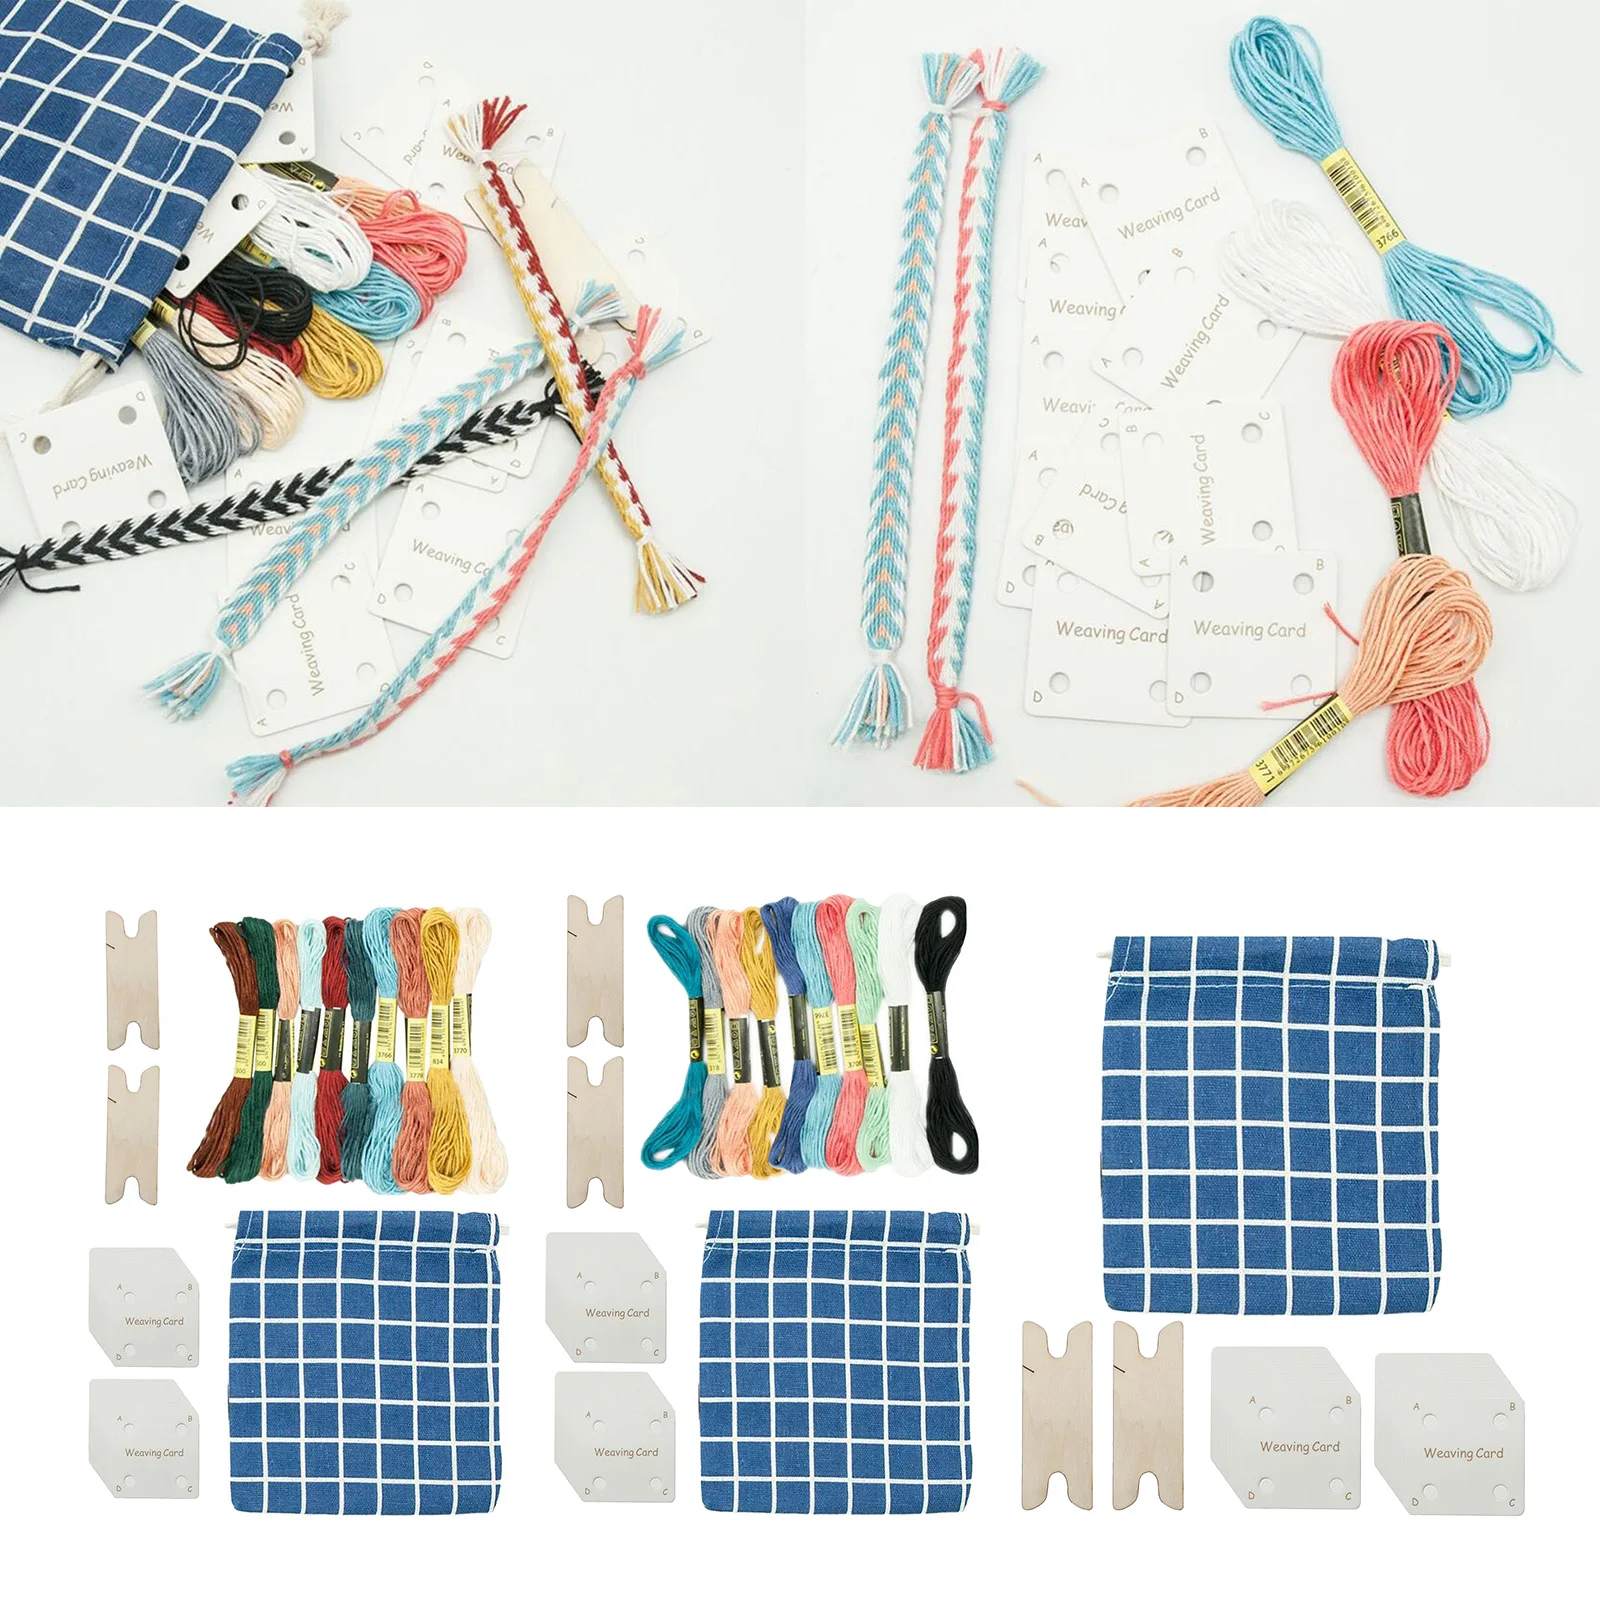 Handy Weaving Cards Kit for Loom DIY Craft Weaving Tools Gifts for Friends